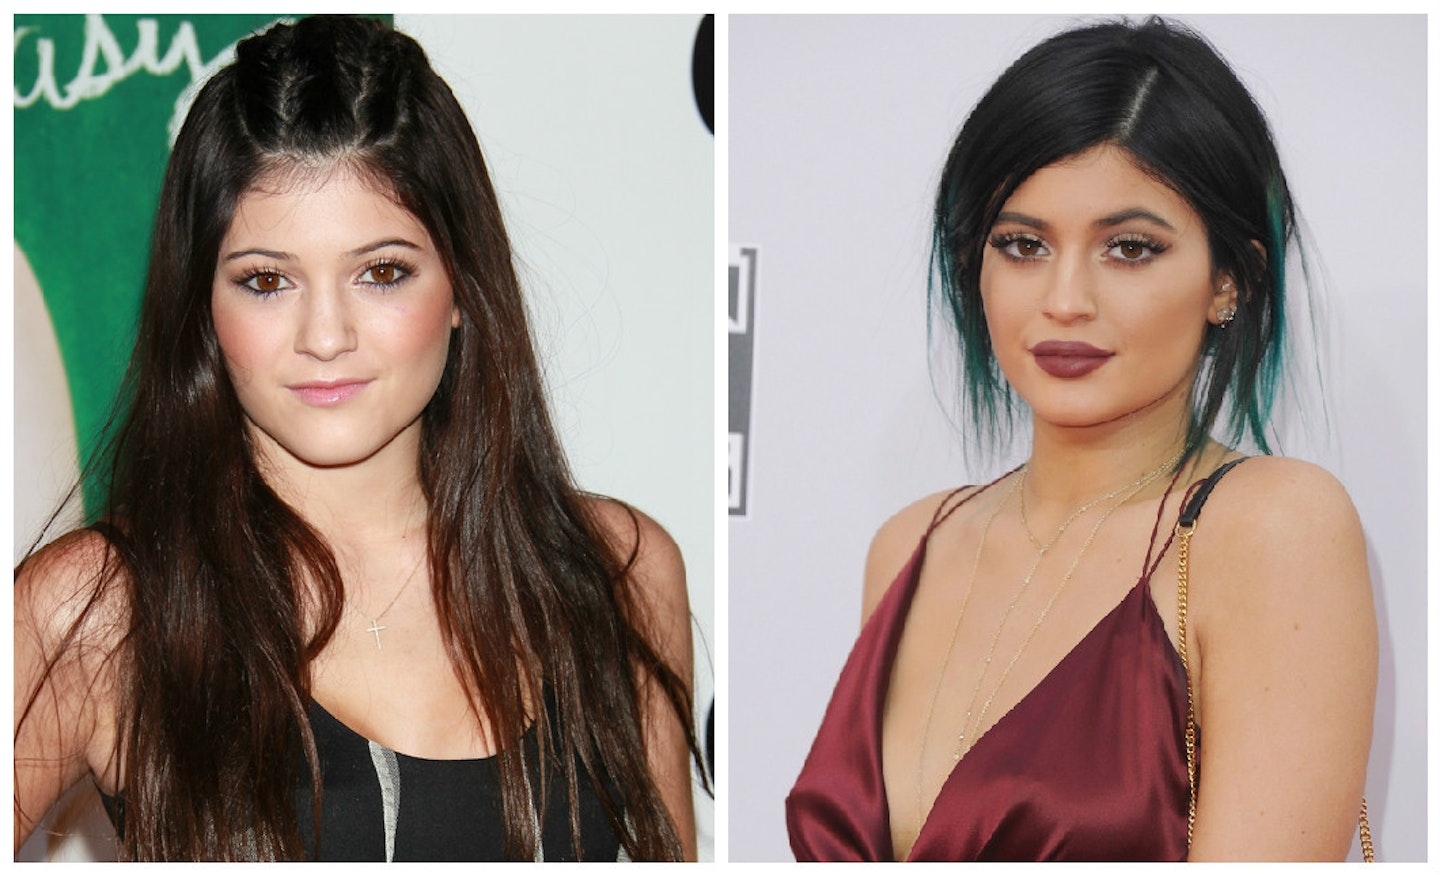 Kylie before and after injections via Getty